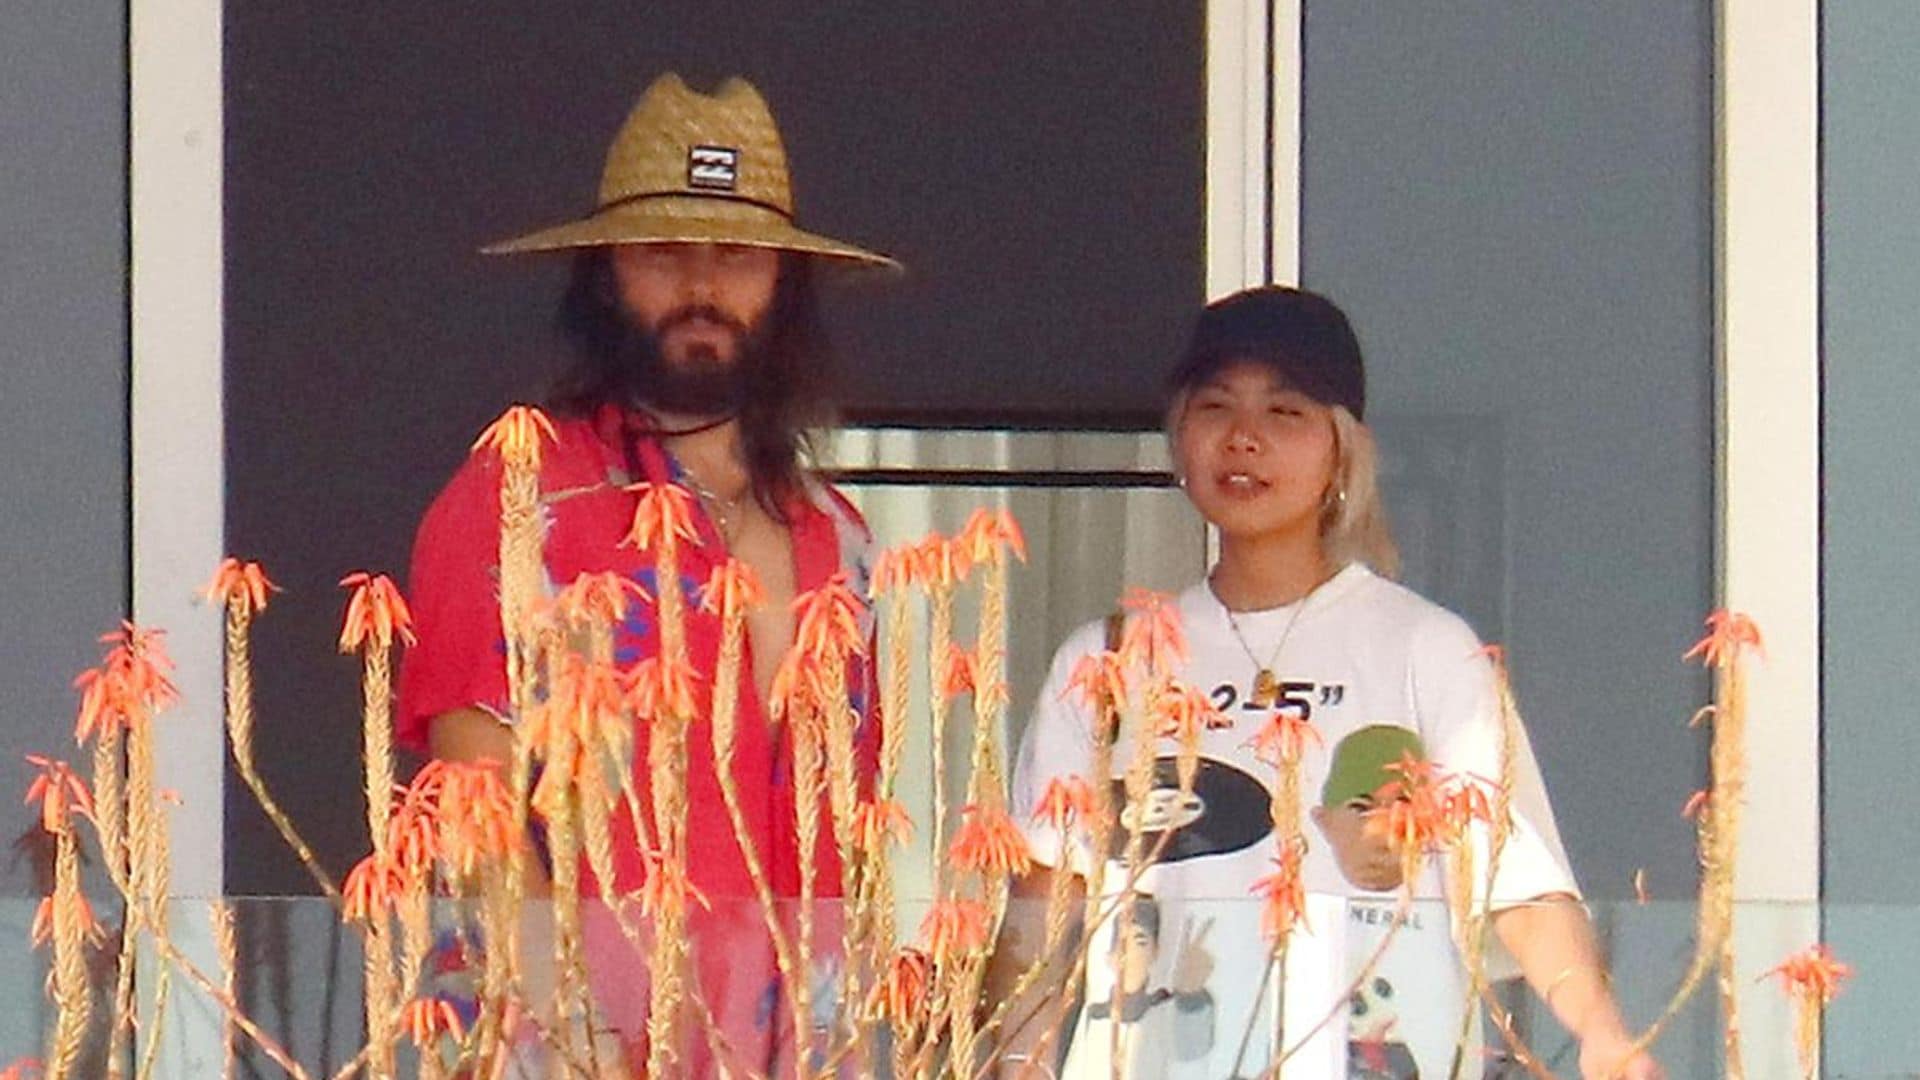 Jared Leto vacations in Antibes with a mystery woman